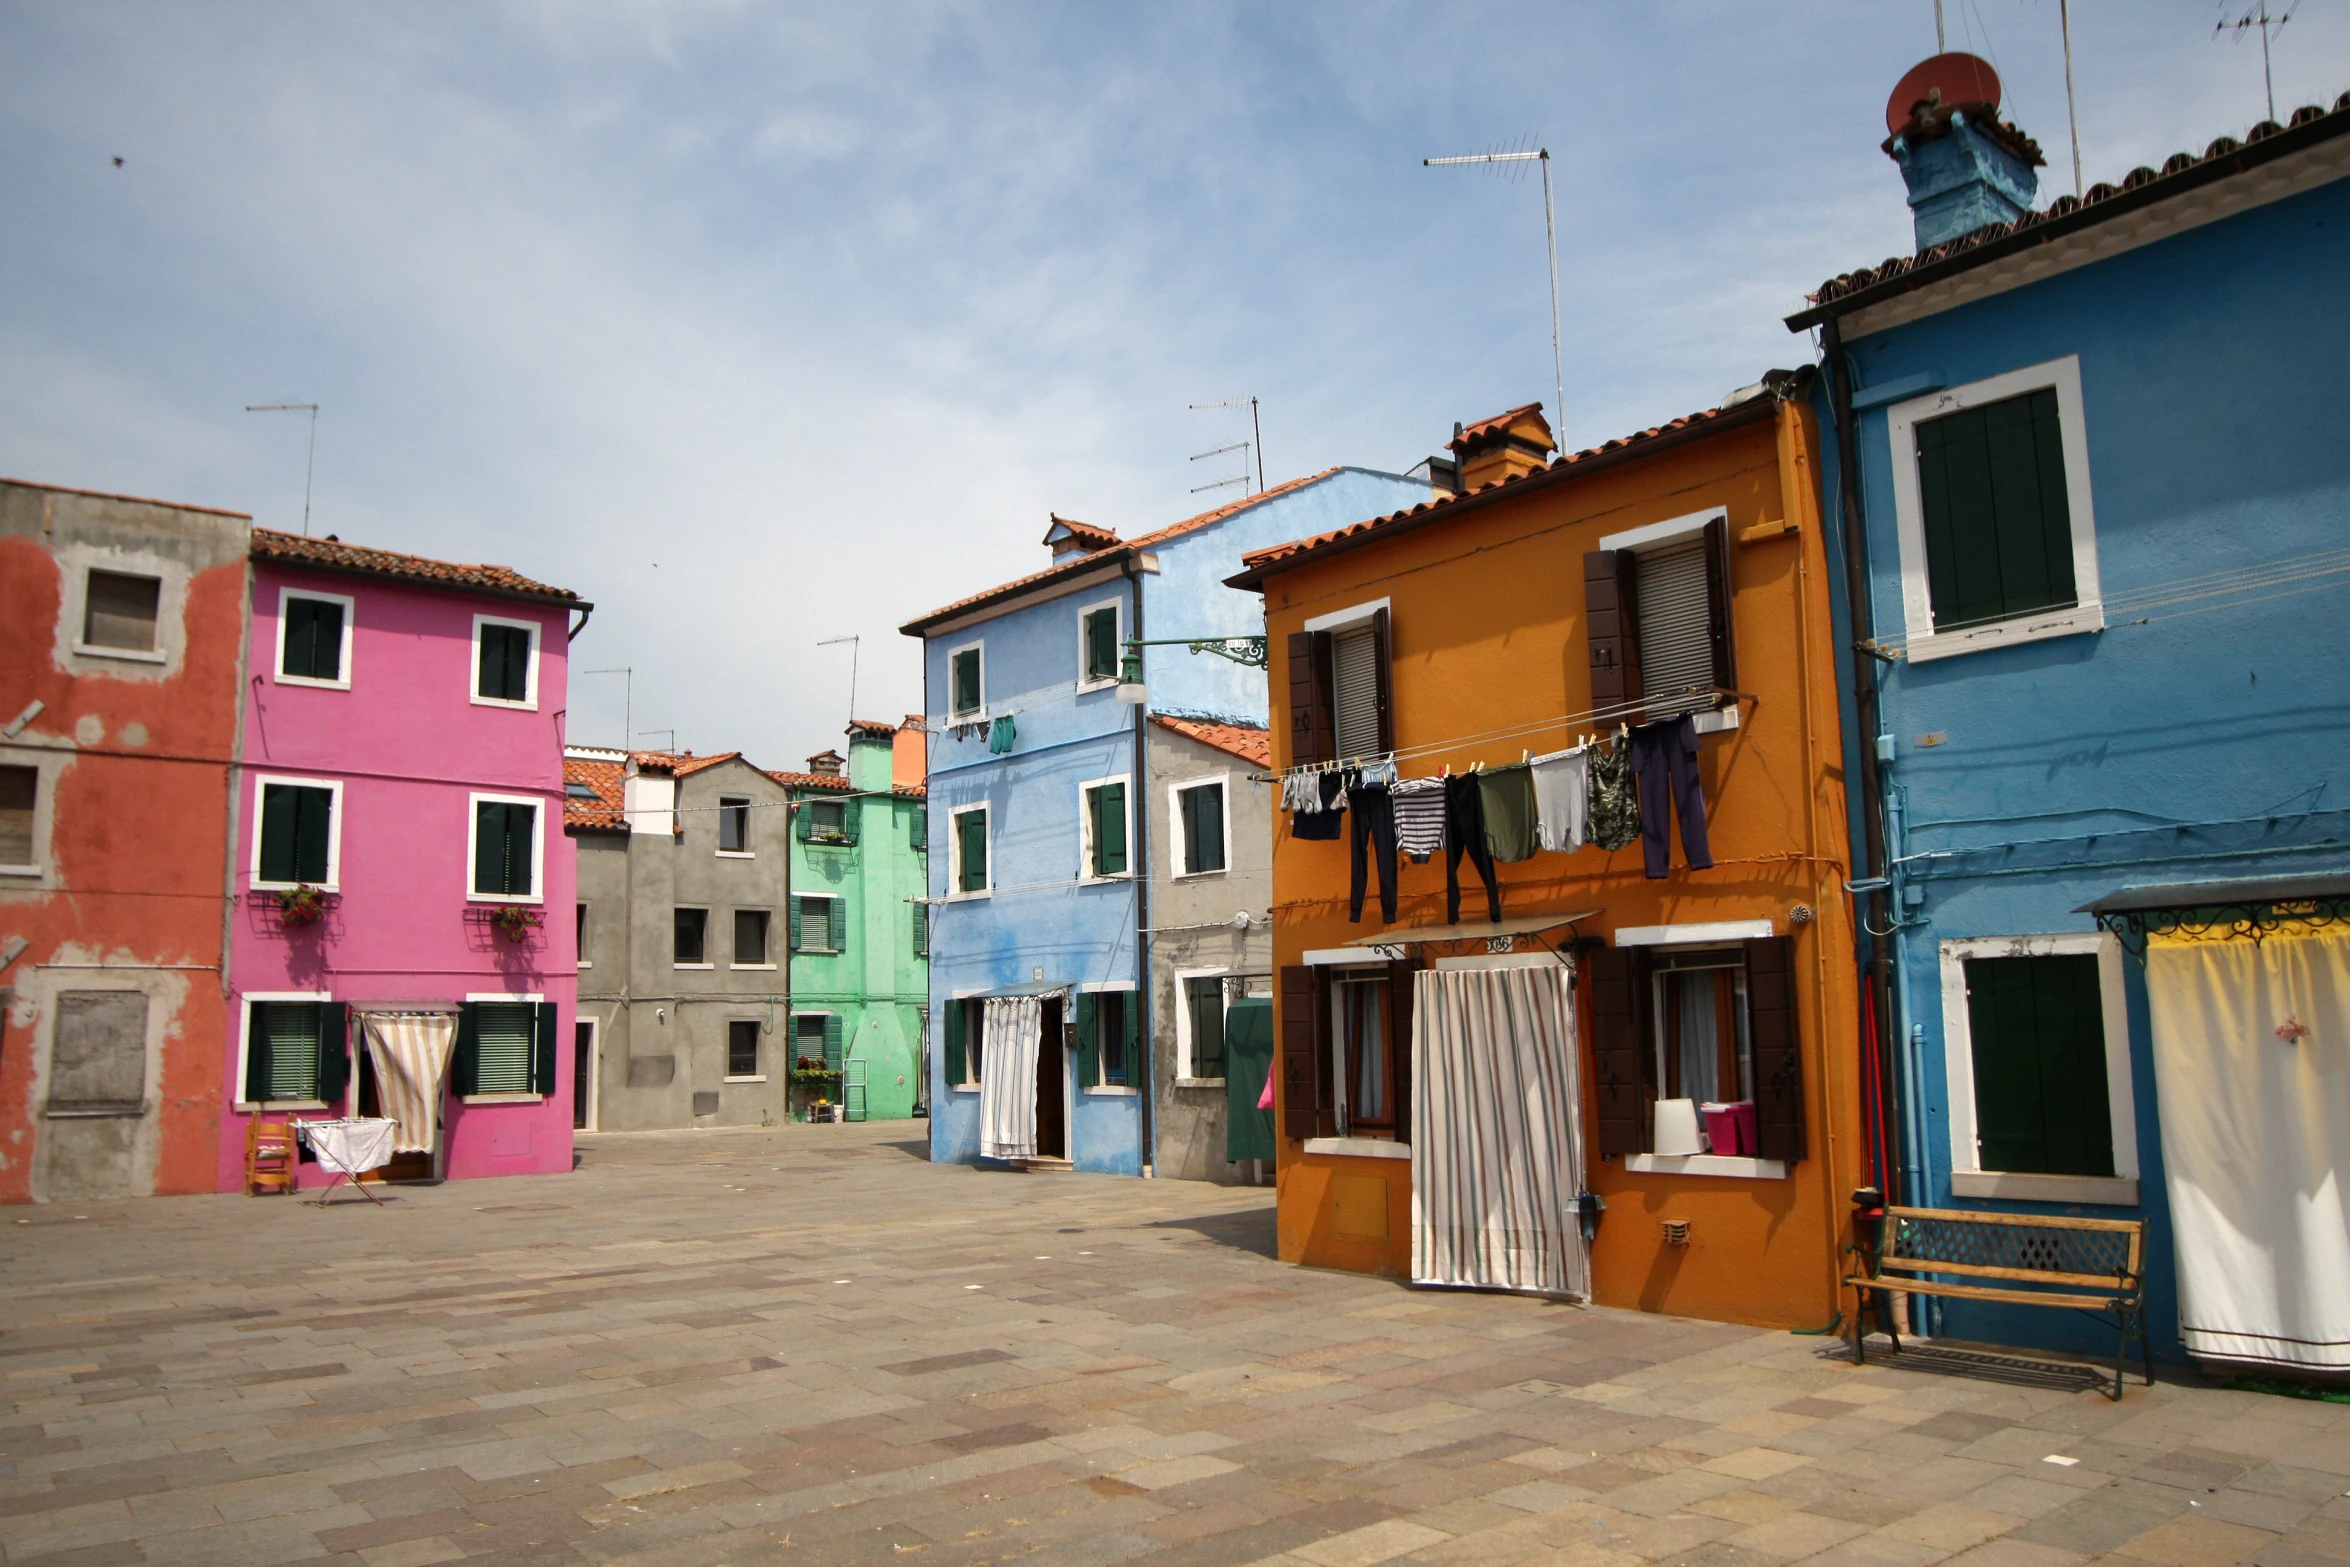 there are many multicolored houses on the street